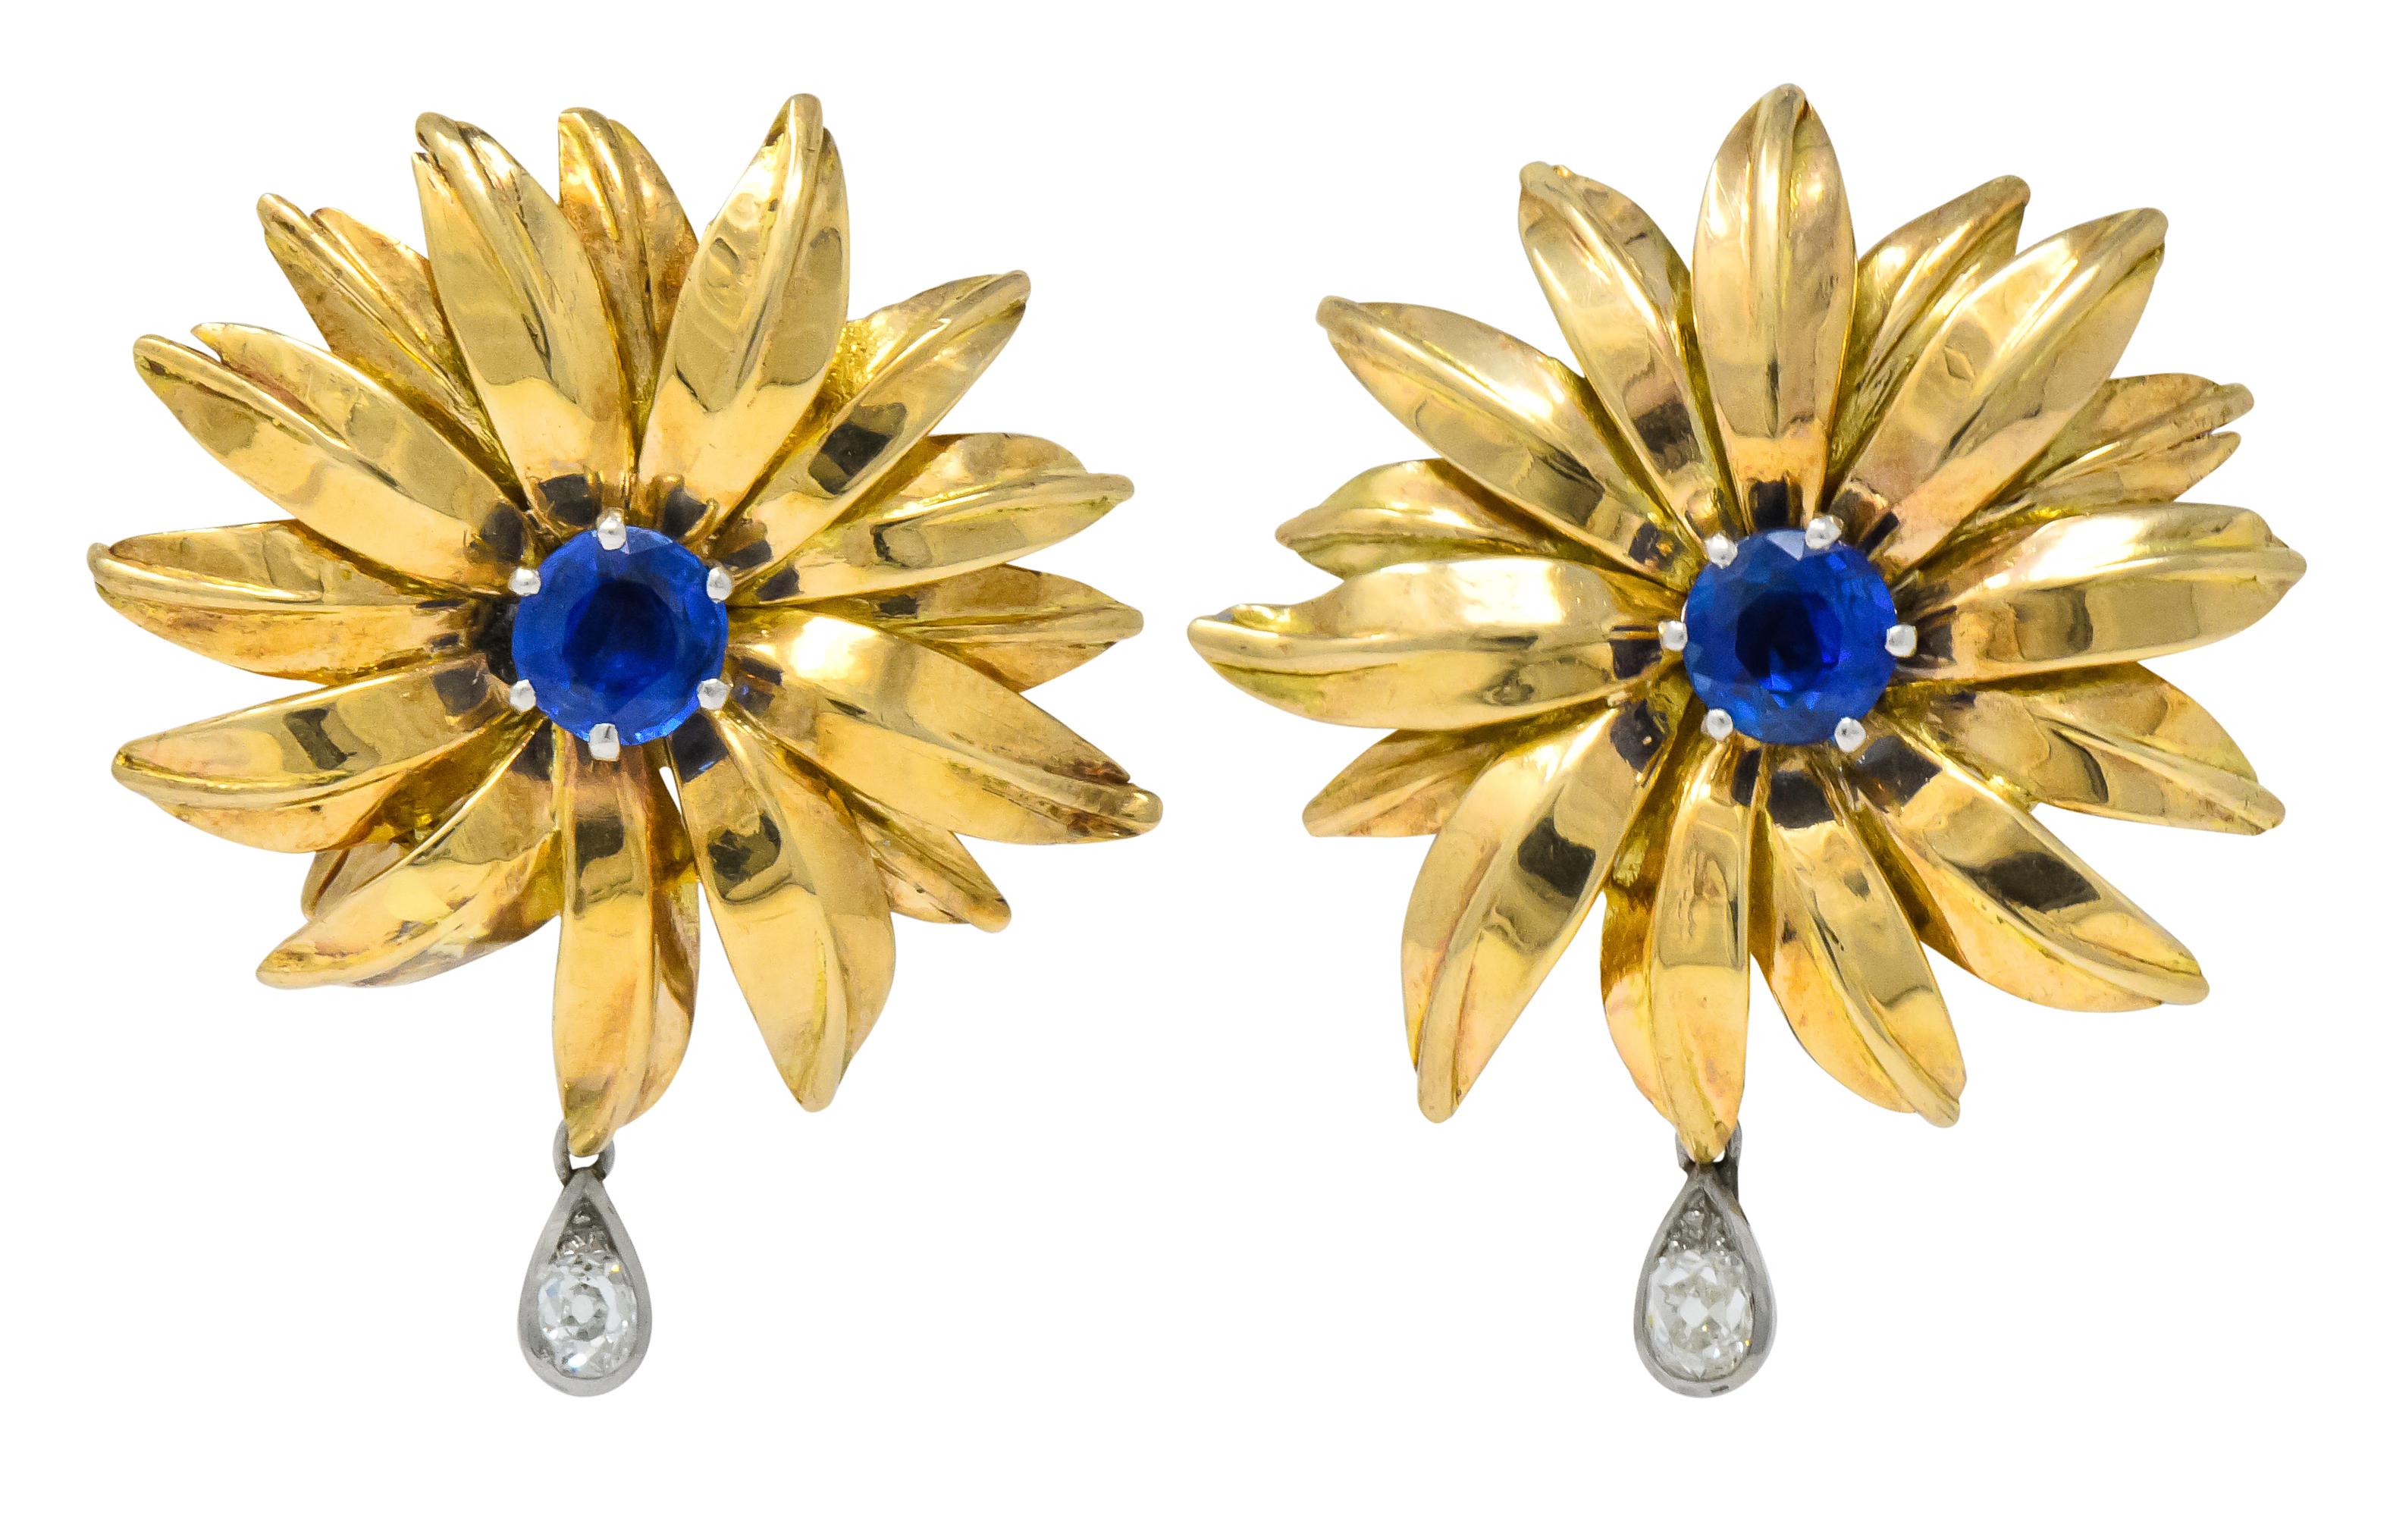 Stunning Cartier Unheated Burmese Sapphire and Diamond Earrings

Circa 1940 London

Lovely 18K yellow gold flower design featuring Burma sapphires and old mine cut diamond dangles 

Royal blue round sapphires weighing approximately 1.80